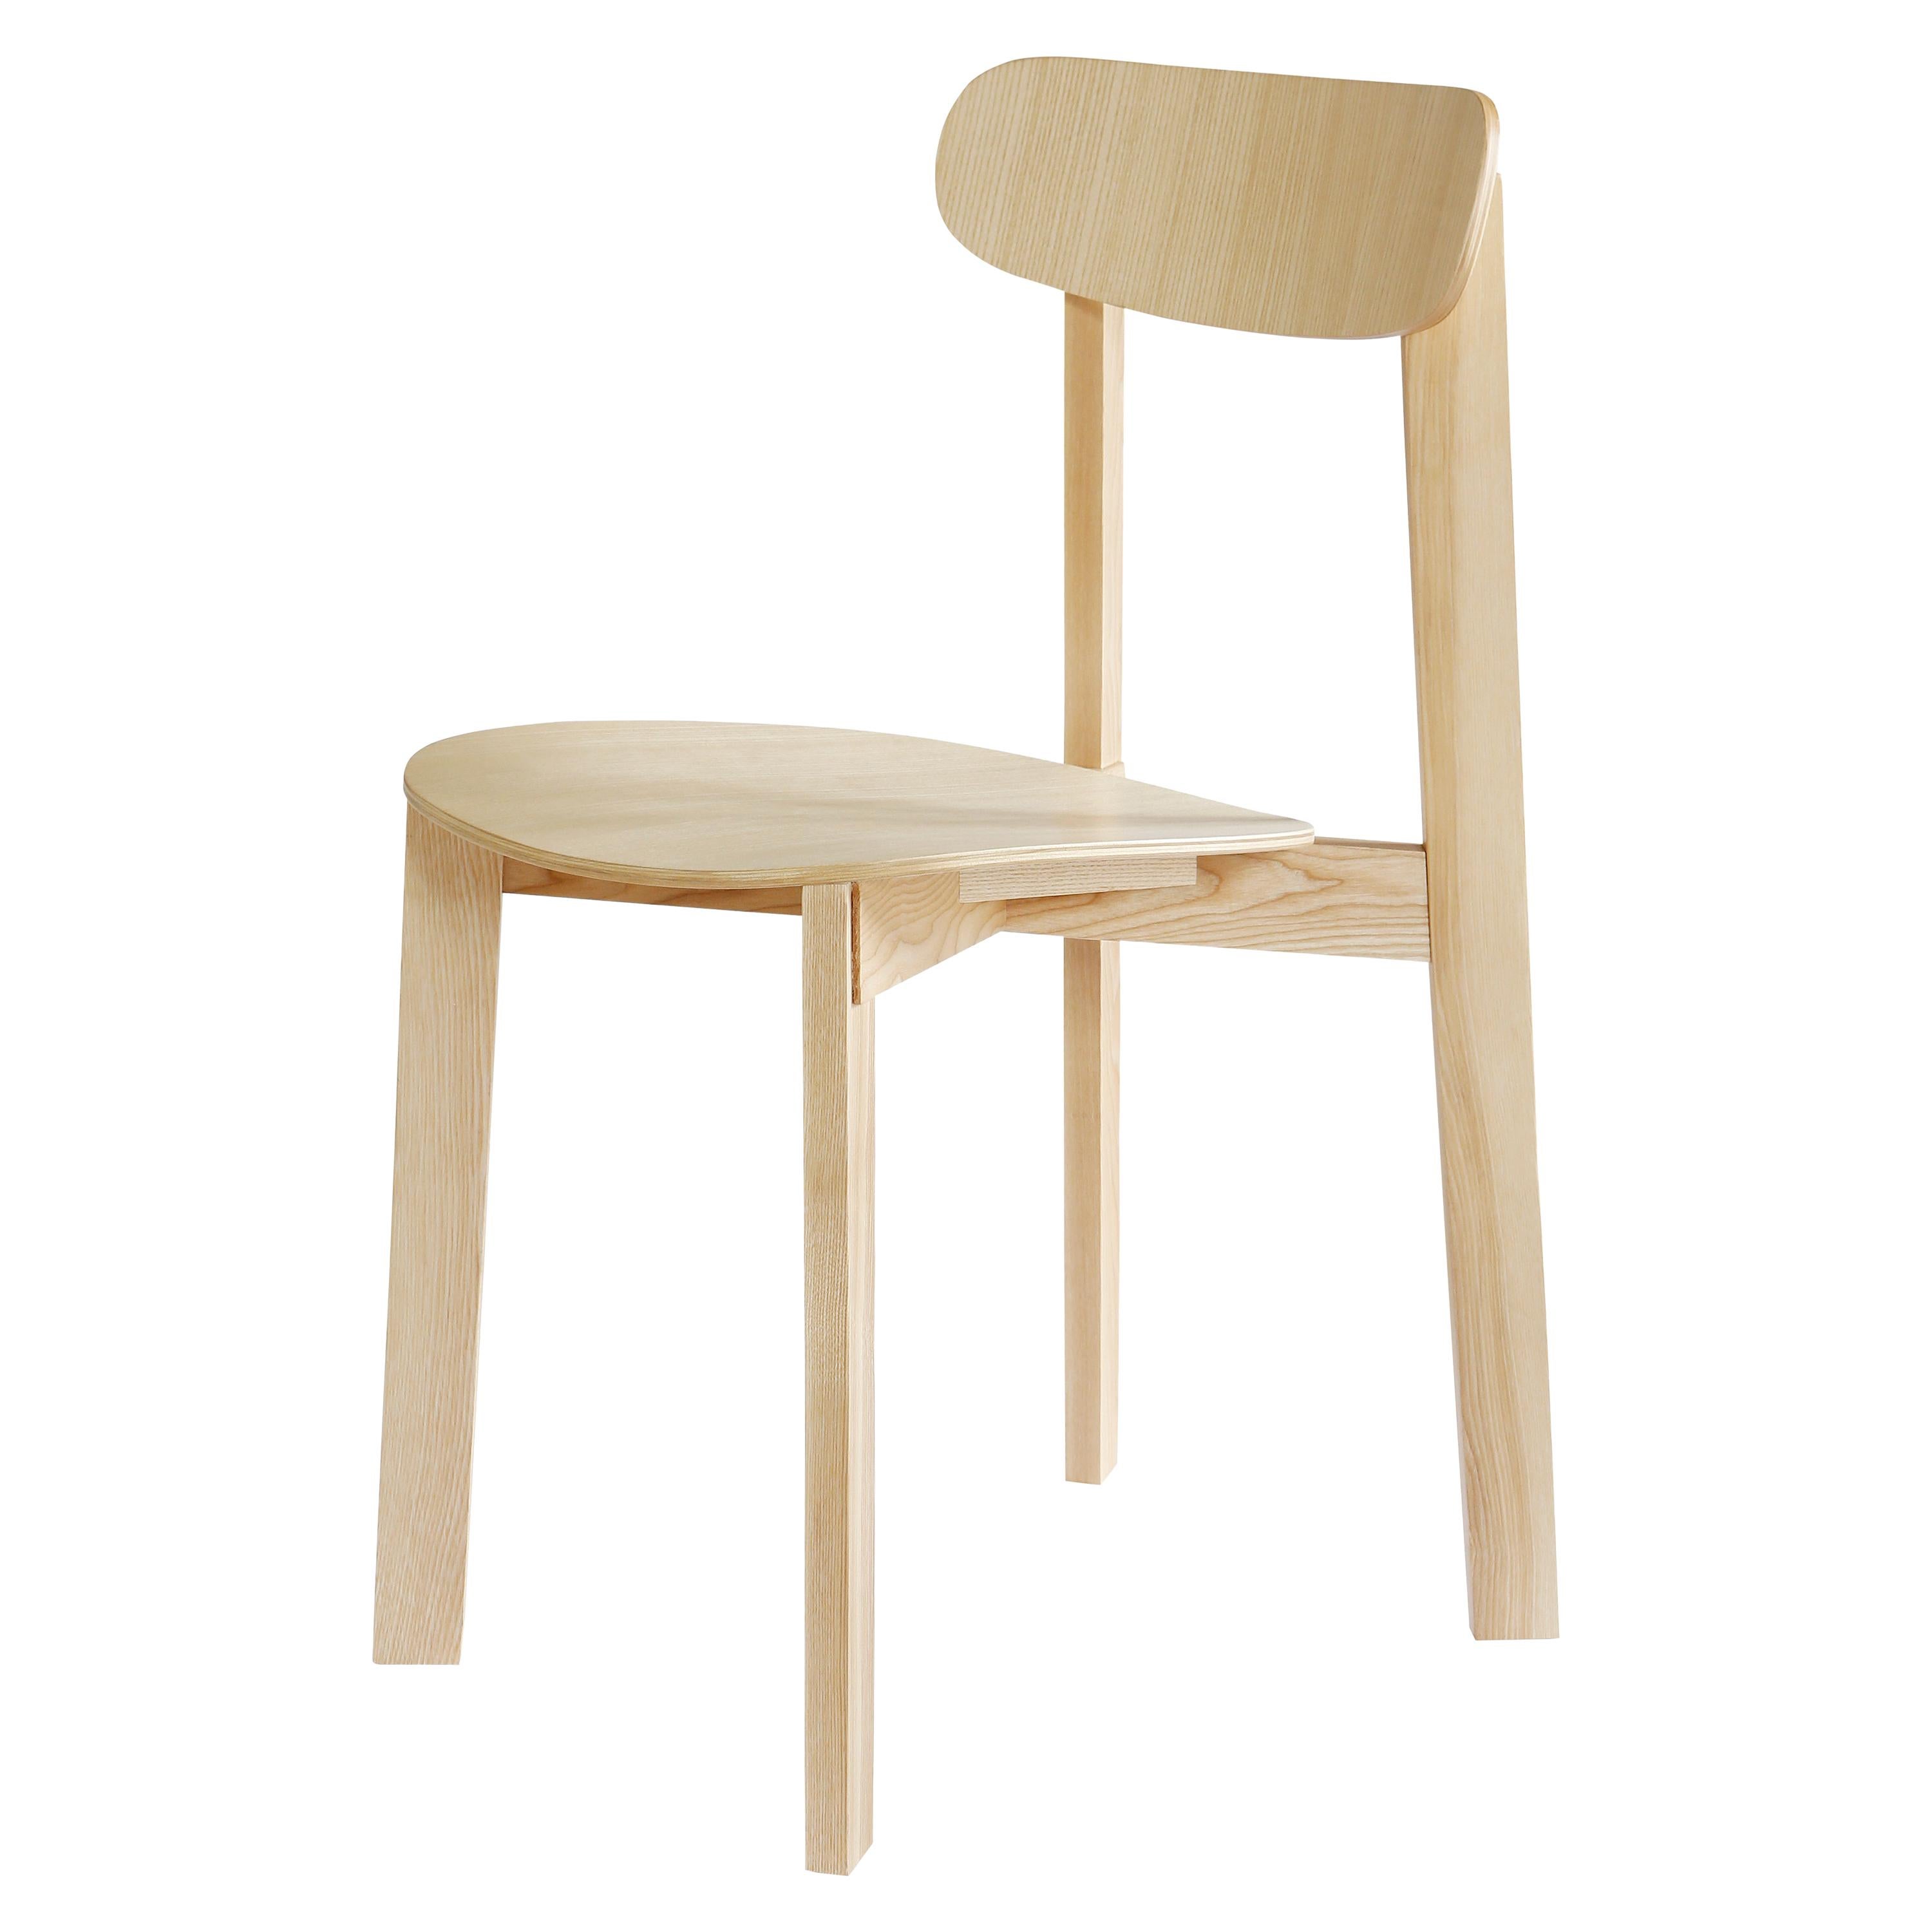 Bondi Stackable Dining Chair in Ashwood